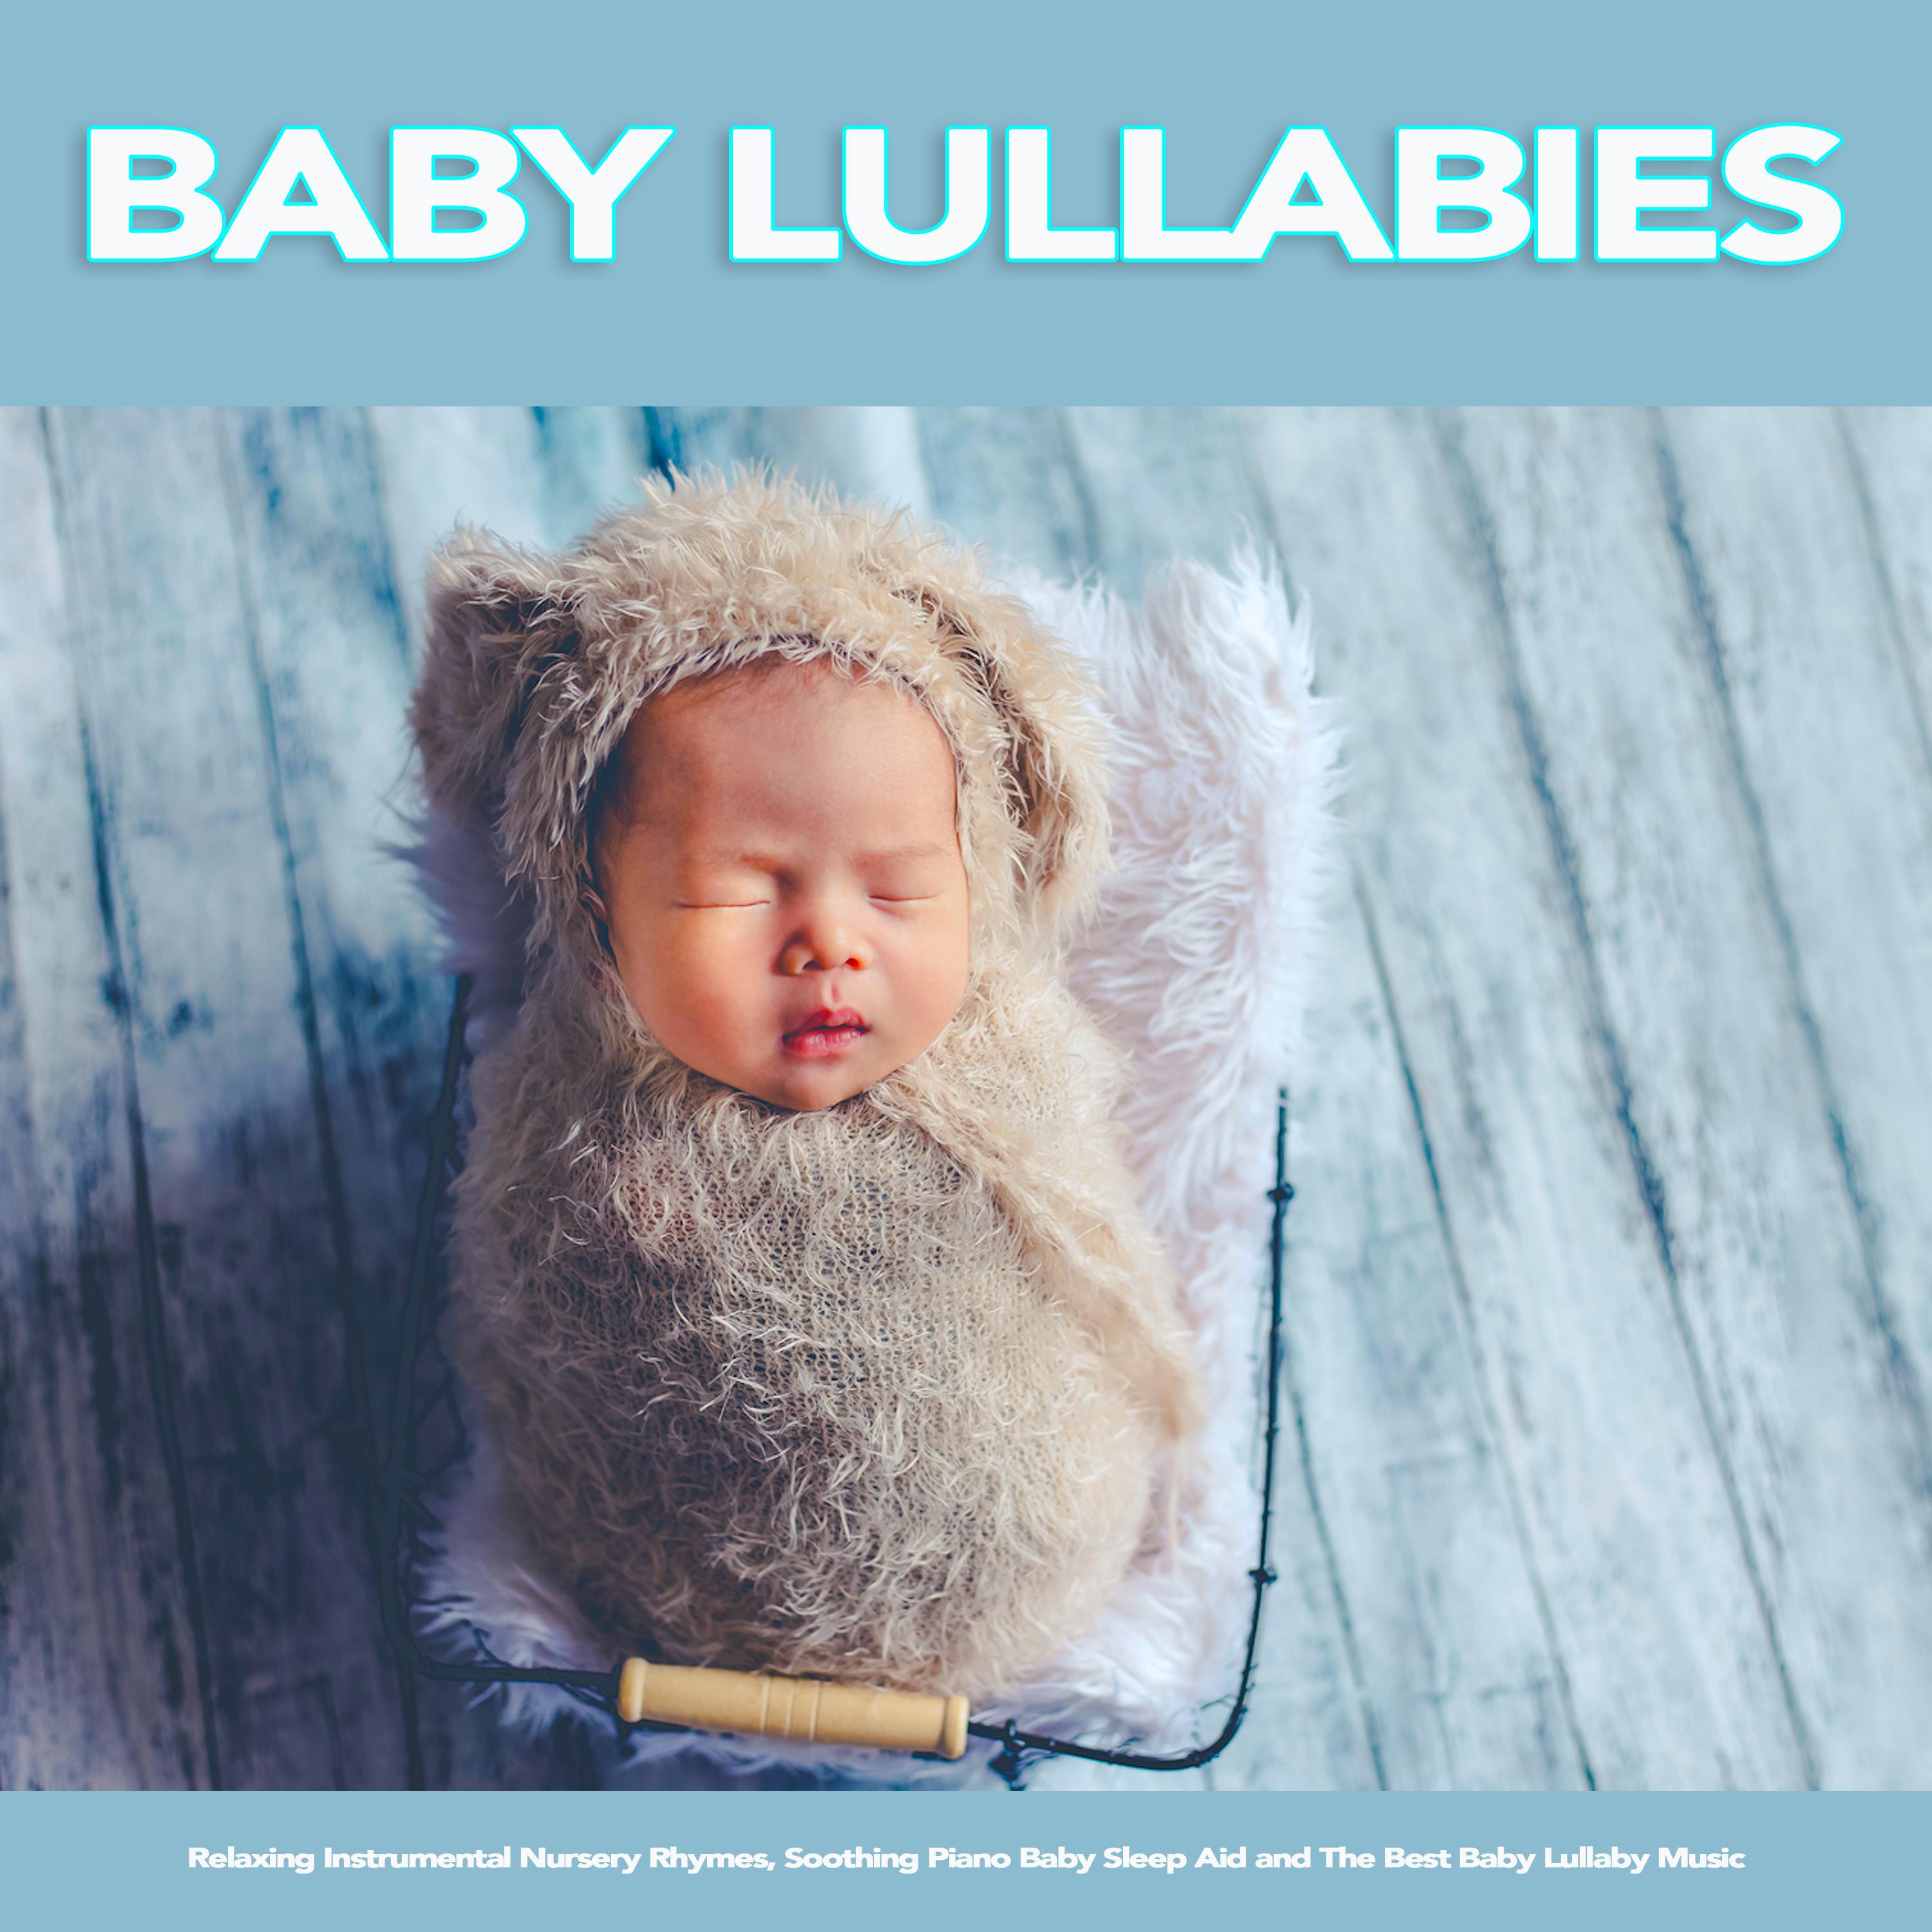 Ambient Piano Baby Lullabies